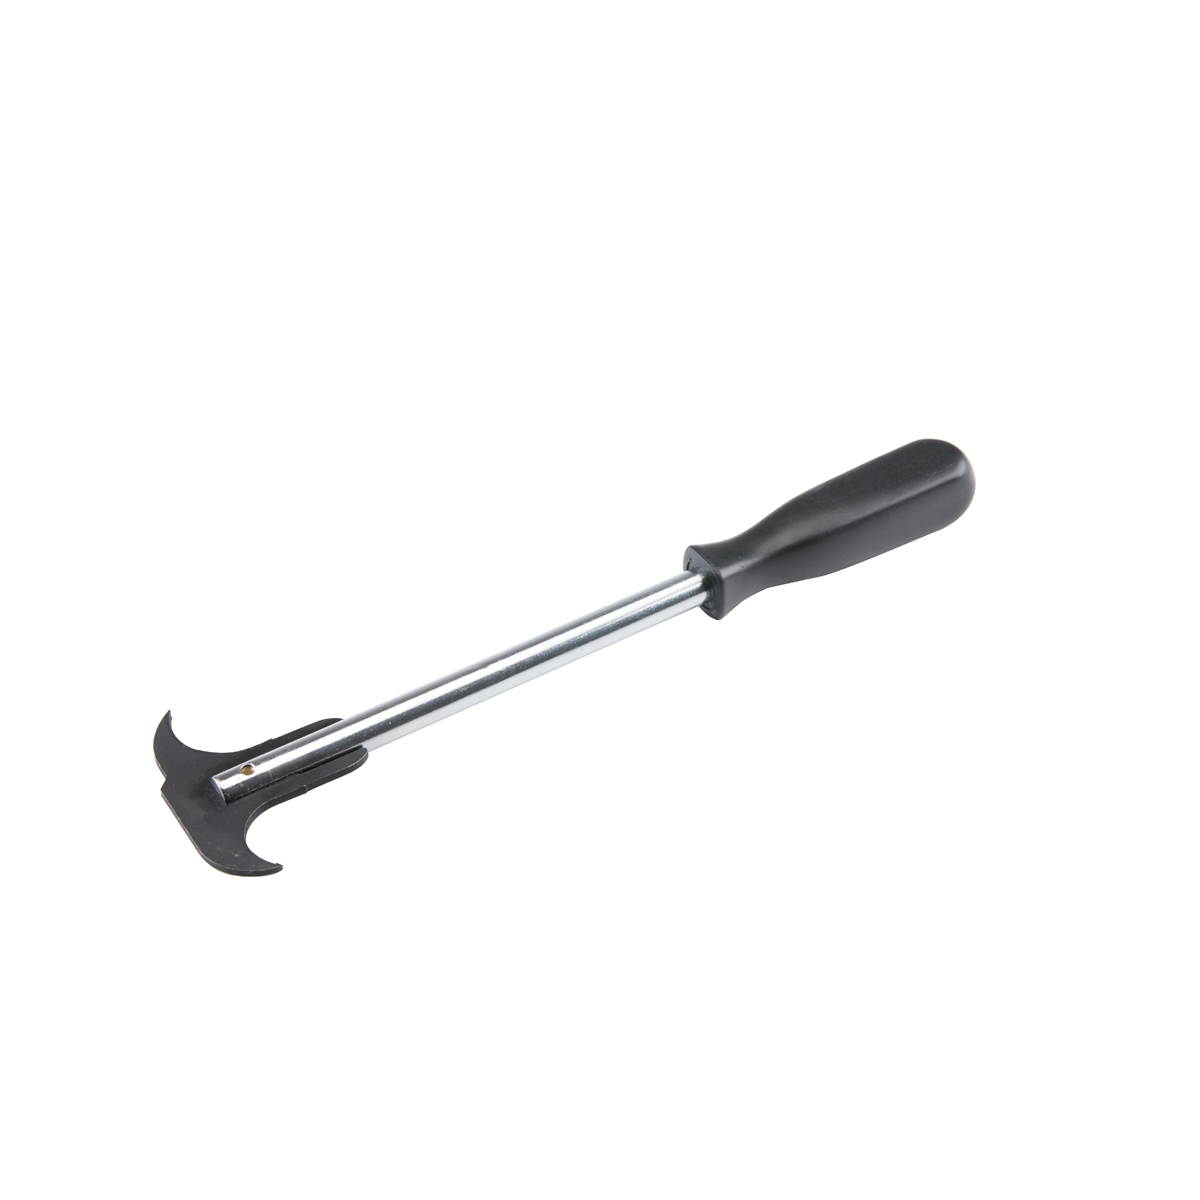 PITTSBURGH AUTOMOTIVE Seal Puller with 2 Tips – Item 63039 / 35556